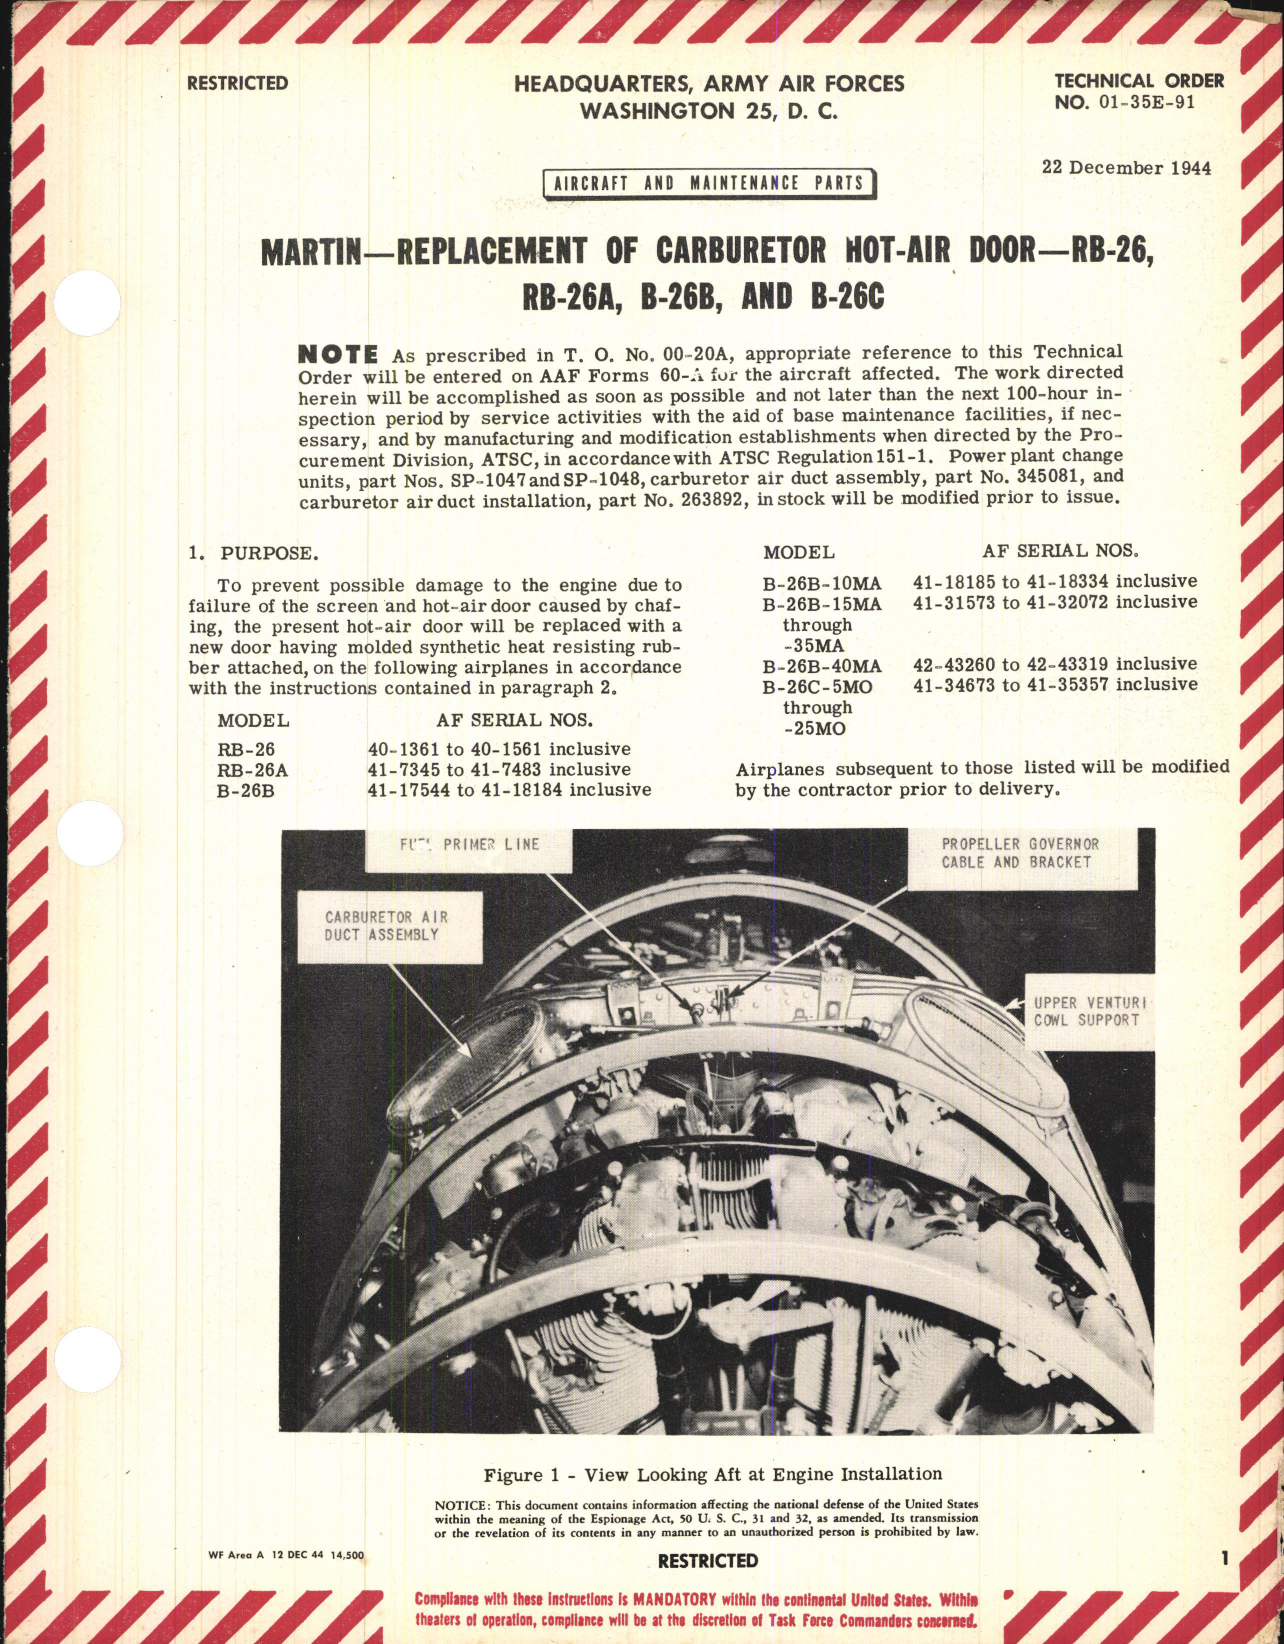 Sample page 1 from AirCorps Library document: Replacement of Carburetor Hot-Air Door for RB-26, RB-26A, B-26B, and B-26C